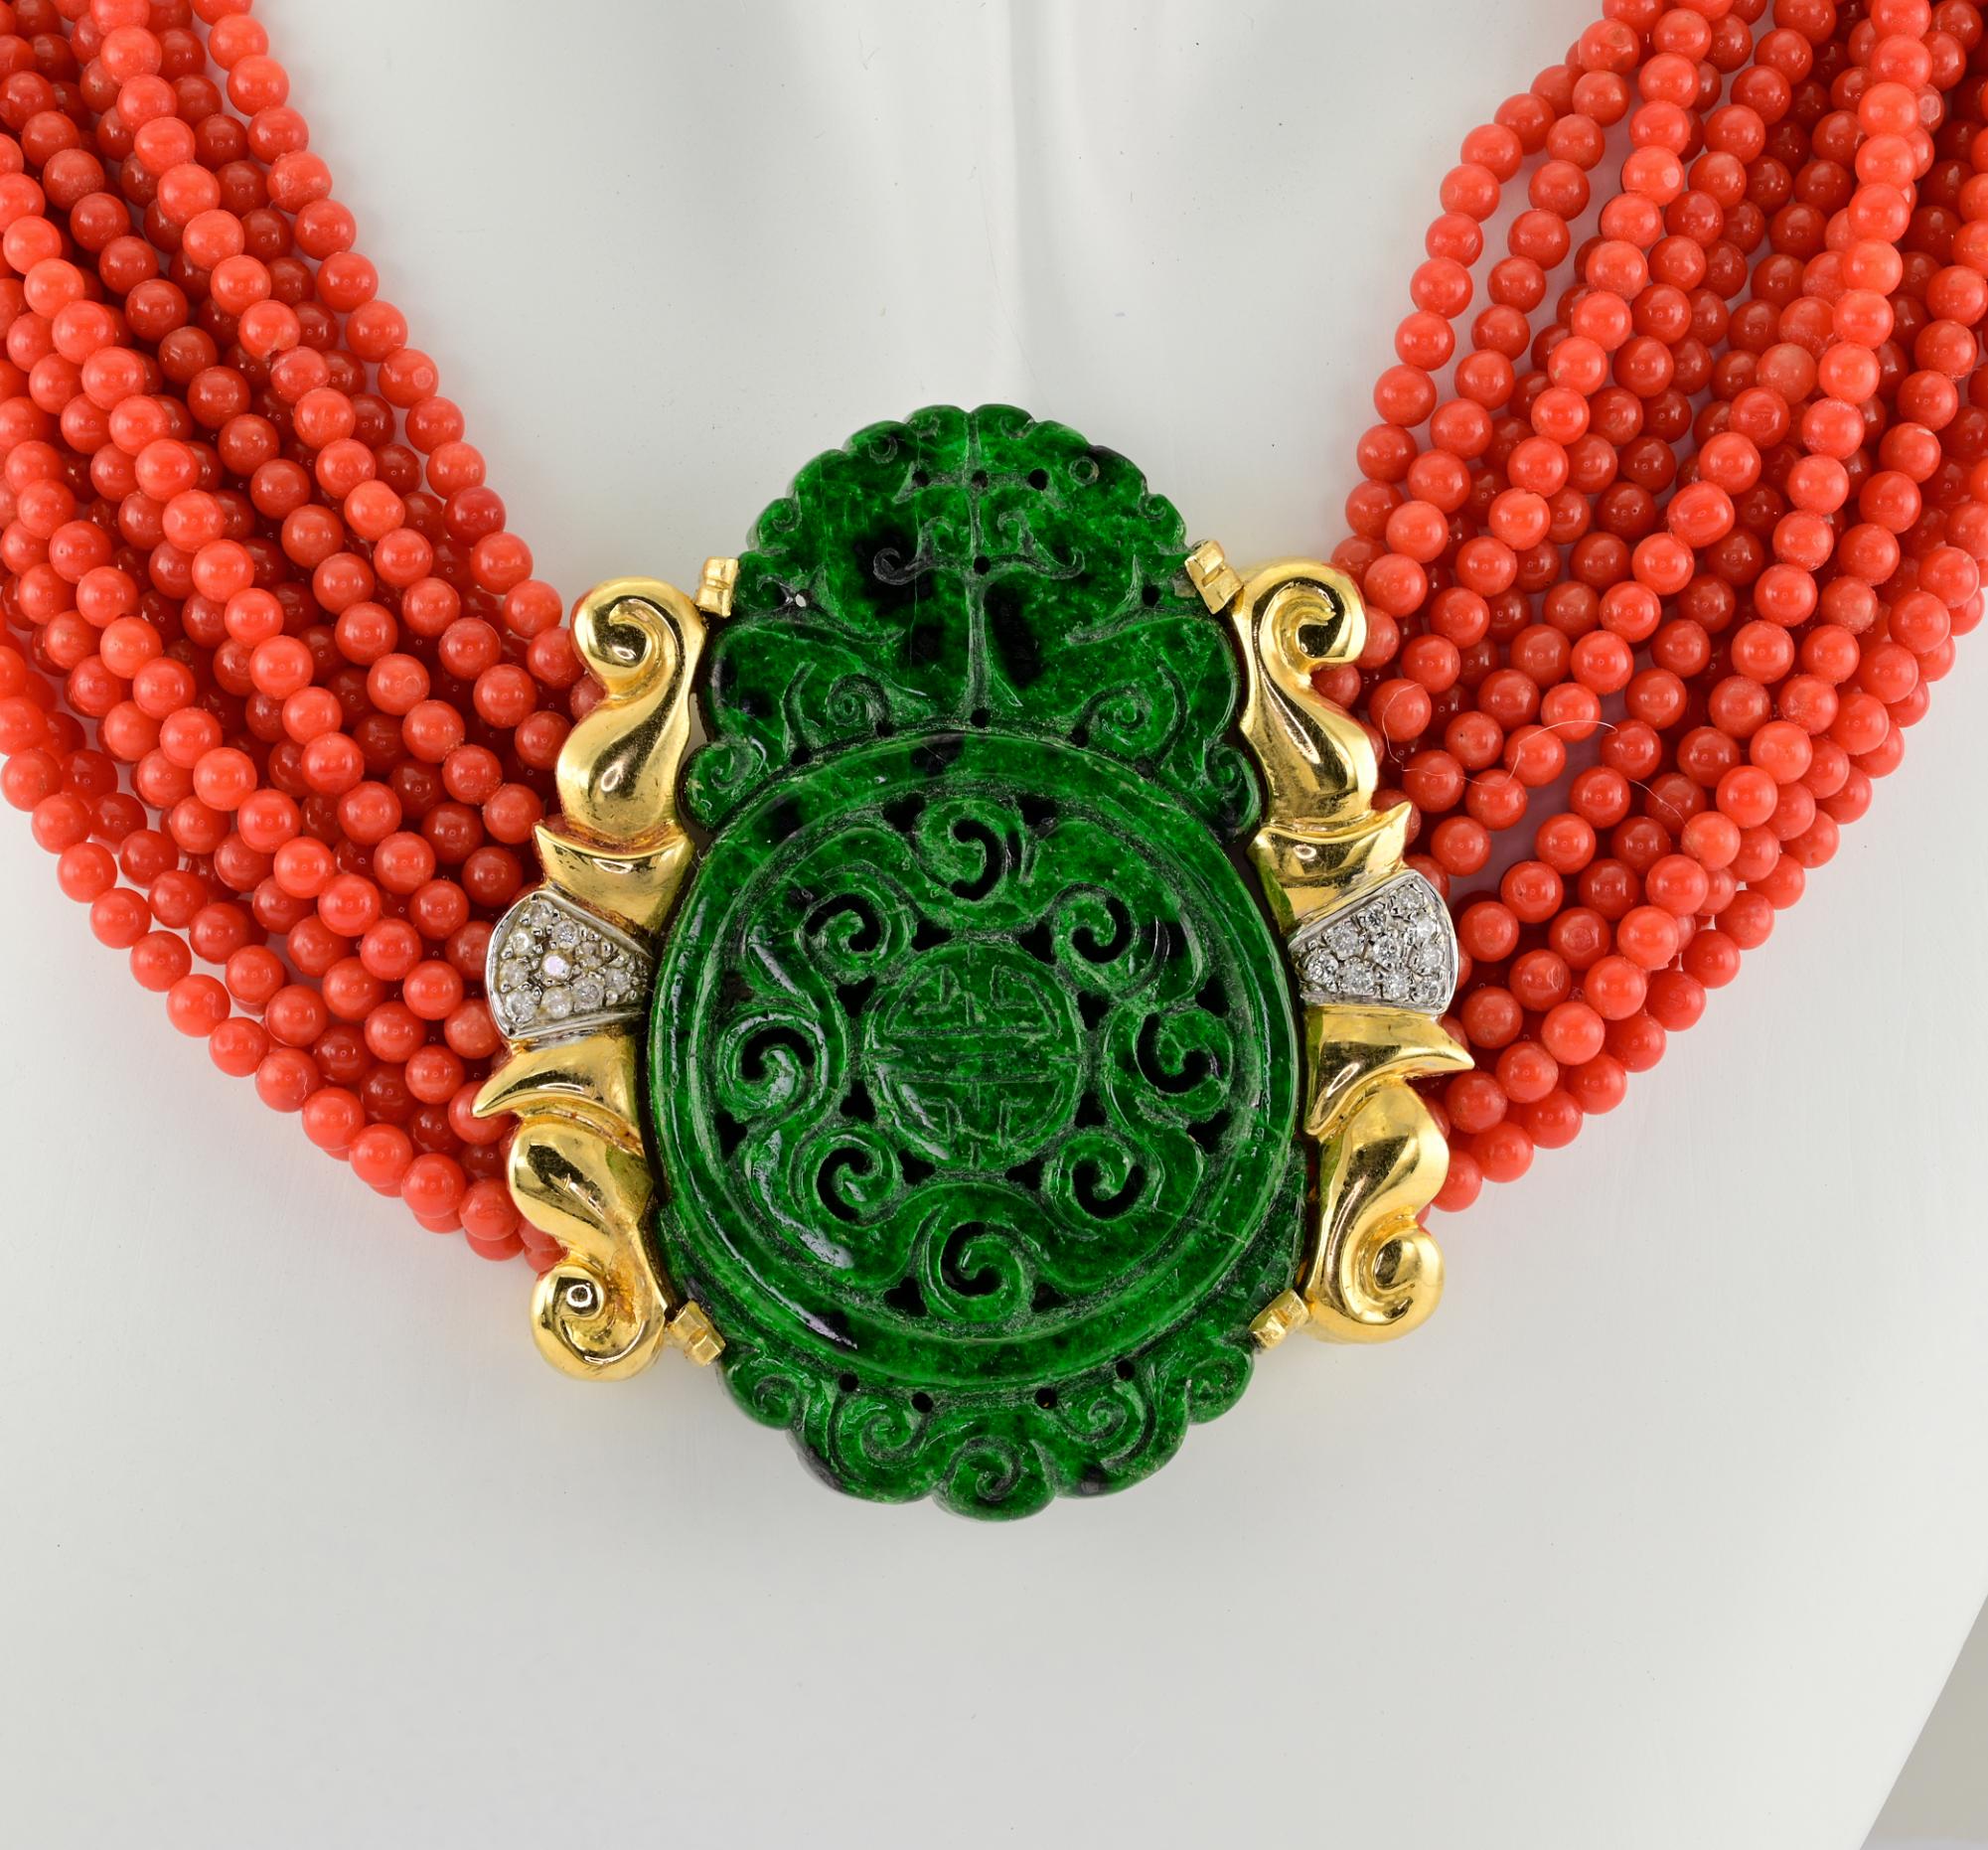 jade and coral necklace